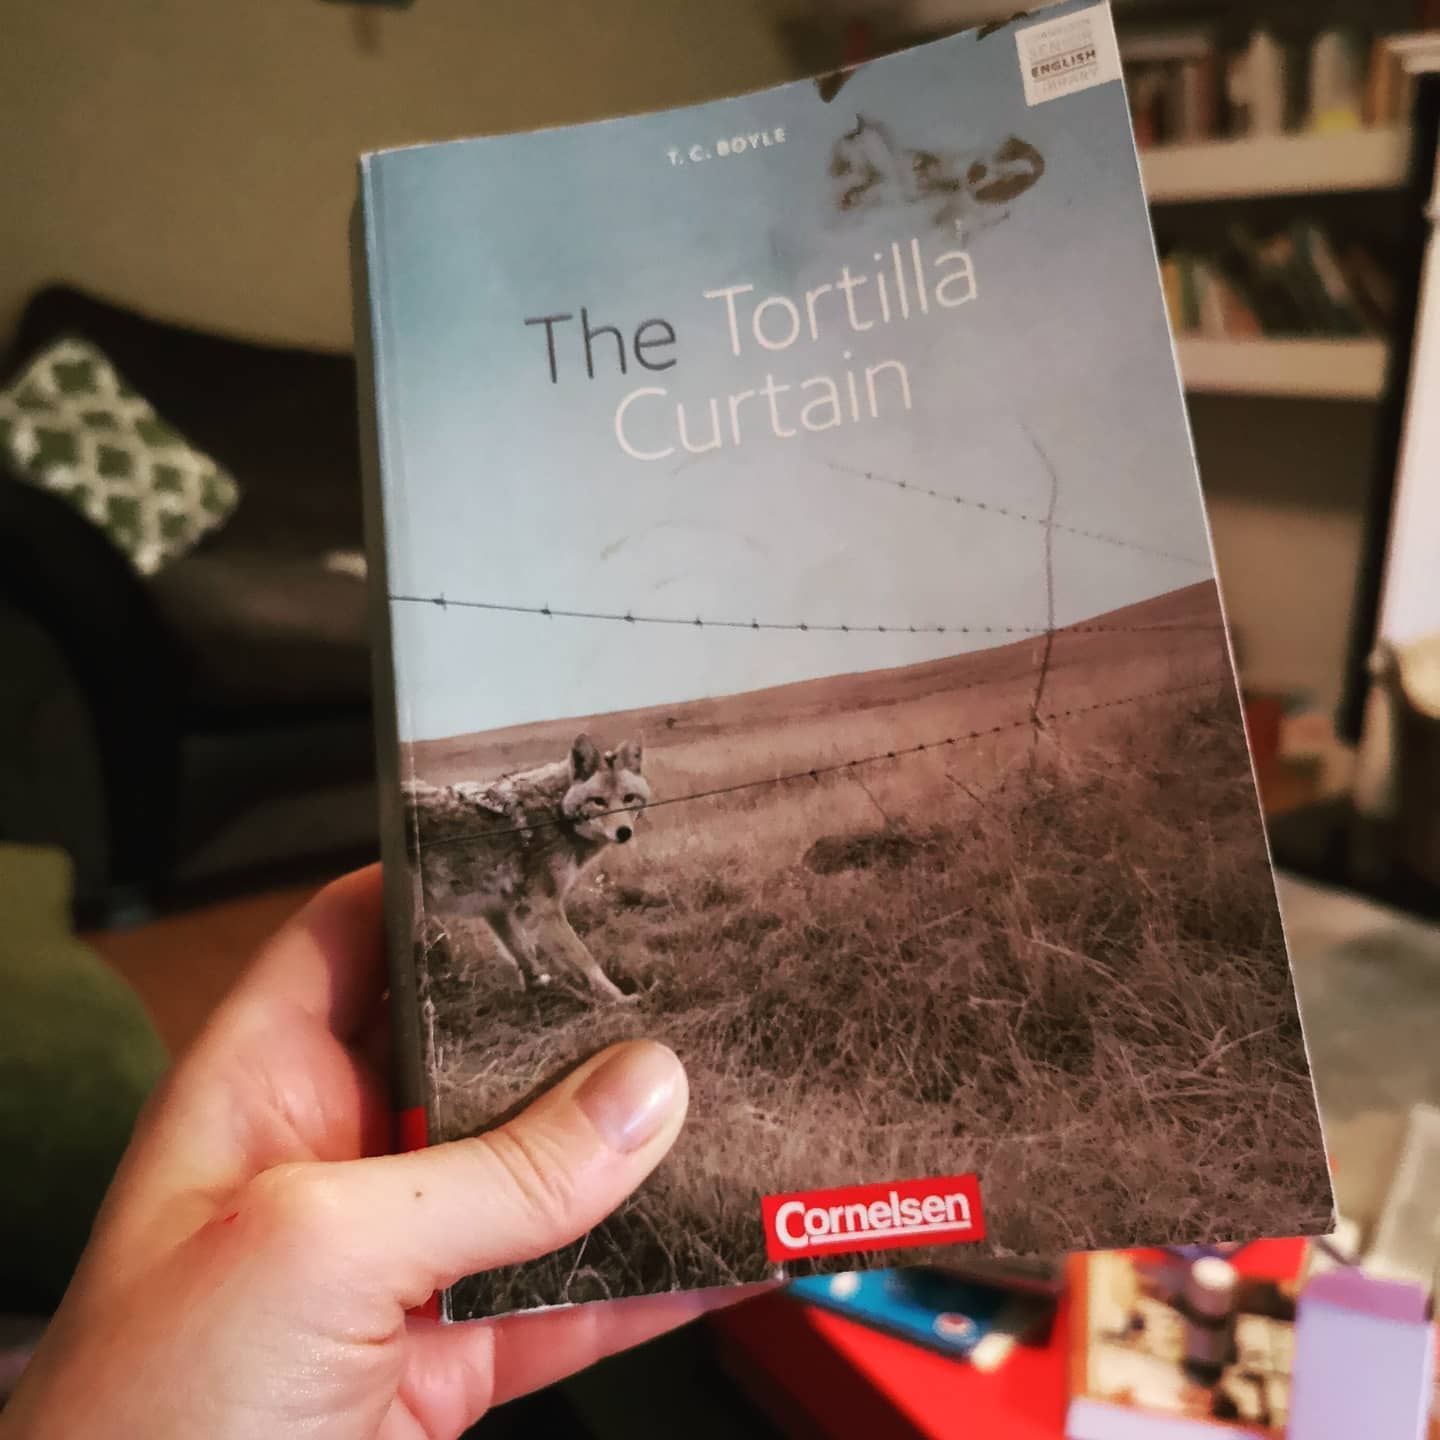 The Tortilla Curtain by T. C. Boyle. Current read. Devouring but let's wait till the end till I make up my mind. No sense in making a snap judgement now...